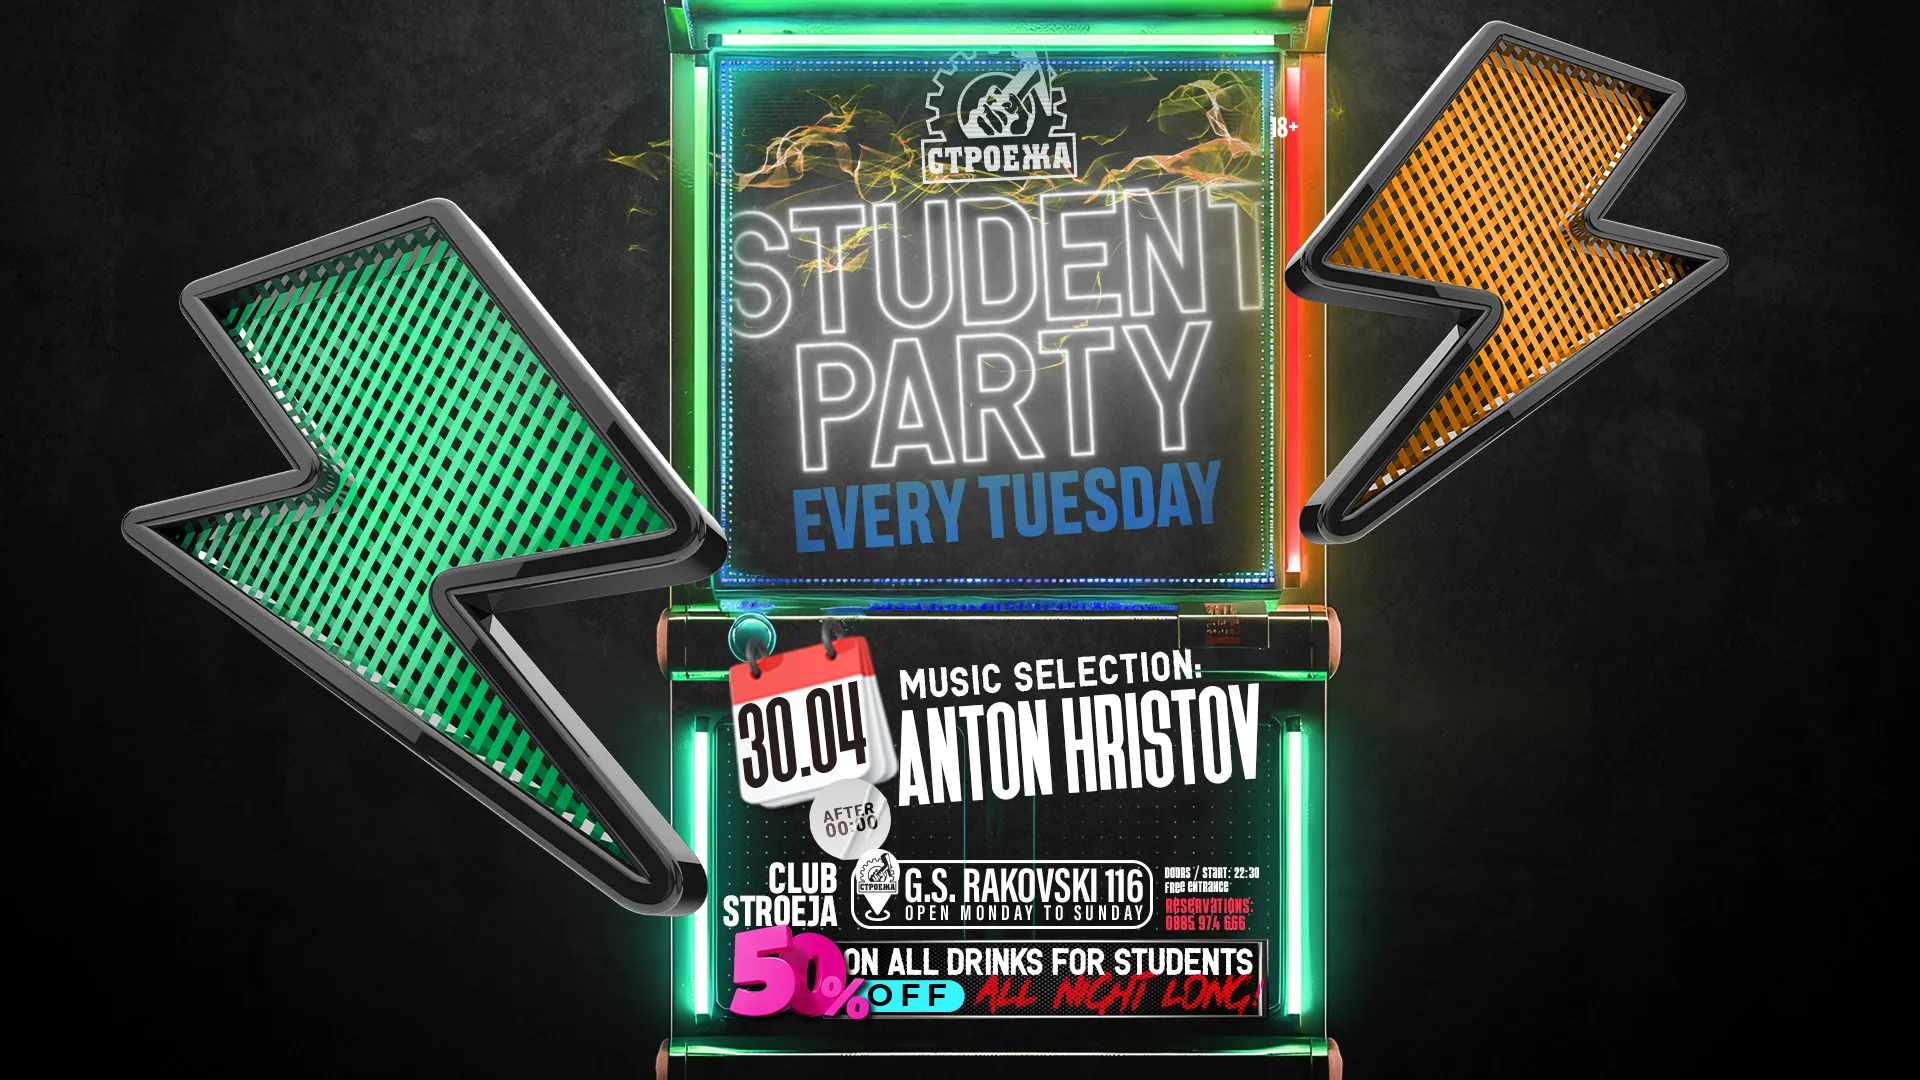 STUDENT PARTY - EVERY TUESDAY